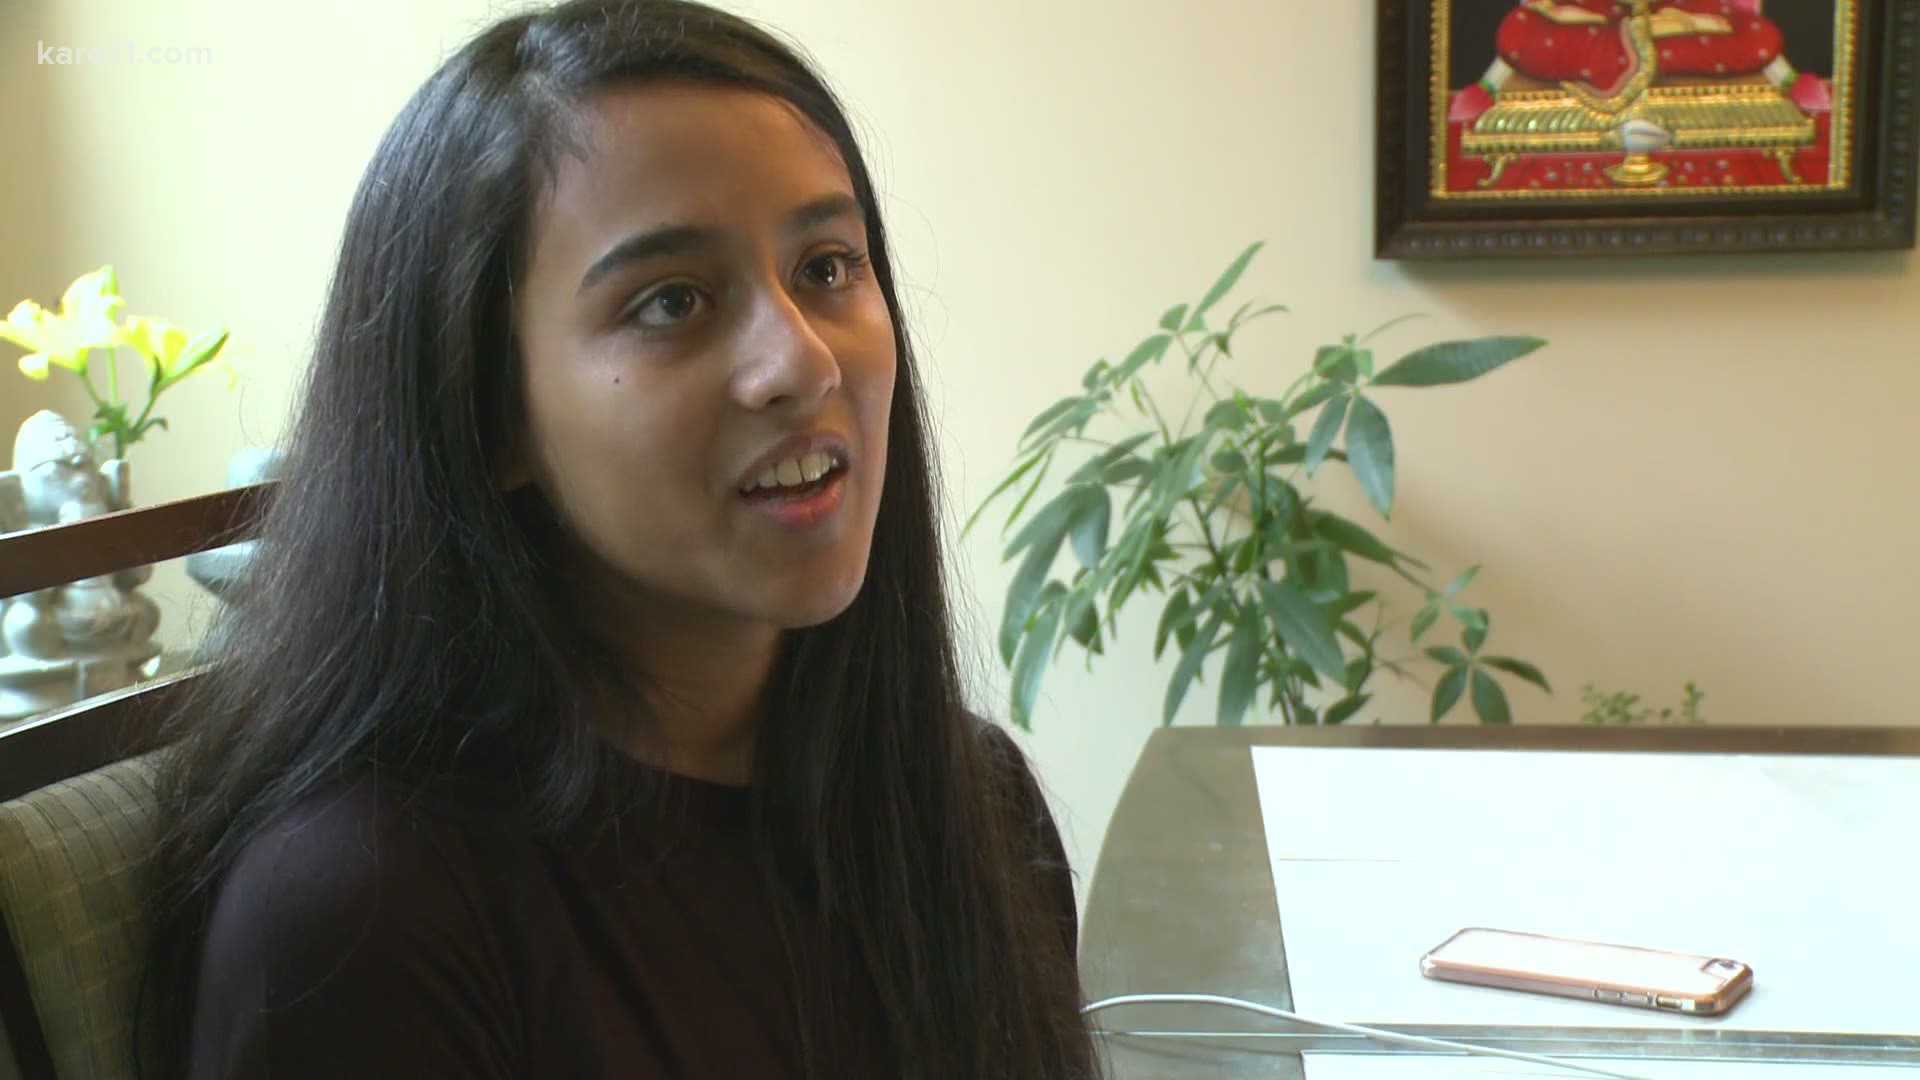 Ankitha Kumar and 11 other teens⁠—most of them students at Eagan High School⁠—started Connexions Tutoring to help alleviate the stress of distance learning.